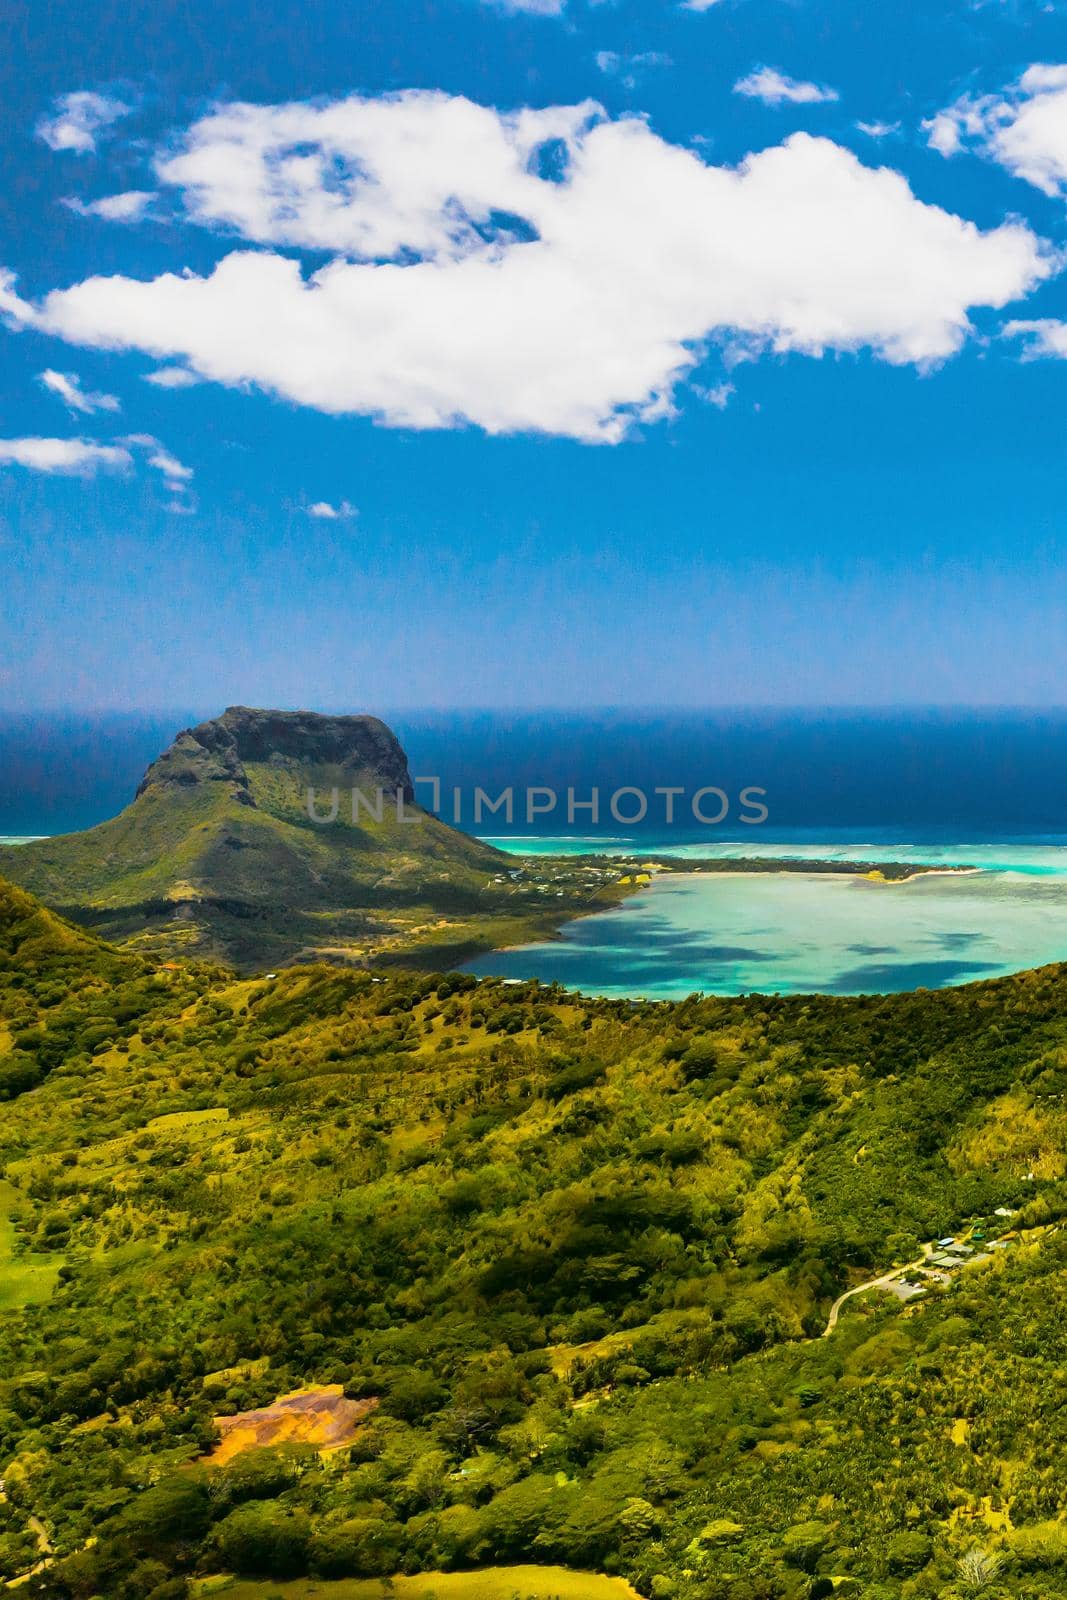 A bird's-eye view of Le Morne Brabant, a UNESCO world heritage site.View of the Sands Chamarel by Lobachad